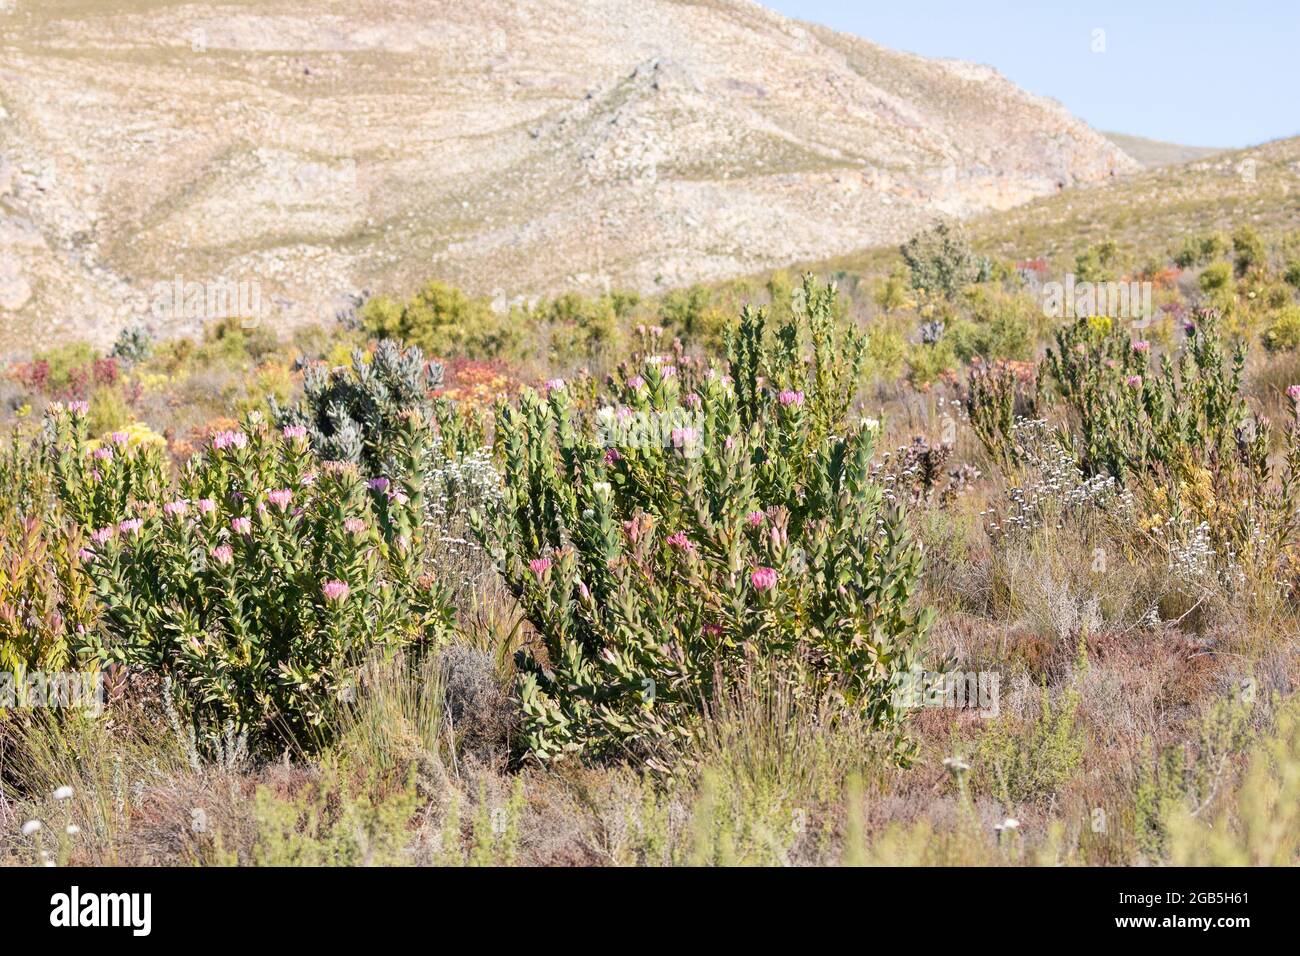 Protea compacta (Bot River Sugarbush, Bot River Protea)  in the Hottentots Holland Mountains fynbos biome, Western Cape, South Africa. This plant is s Stock Photo